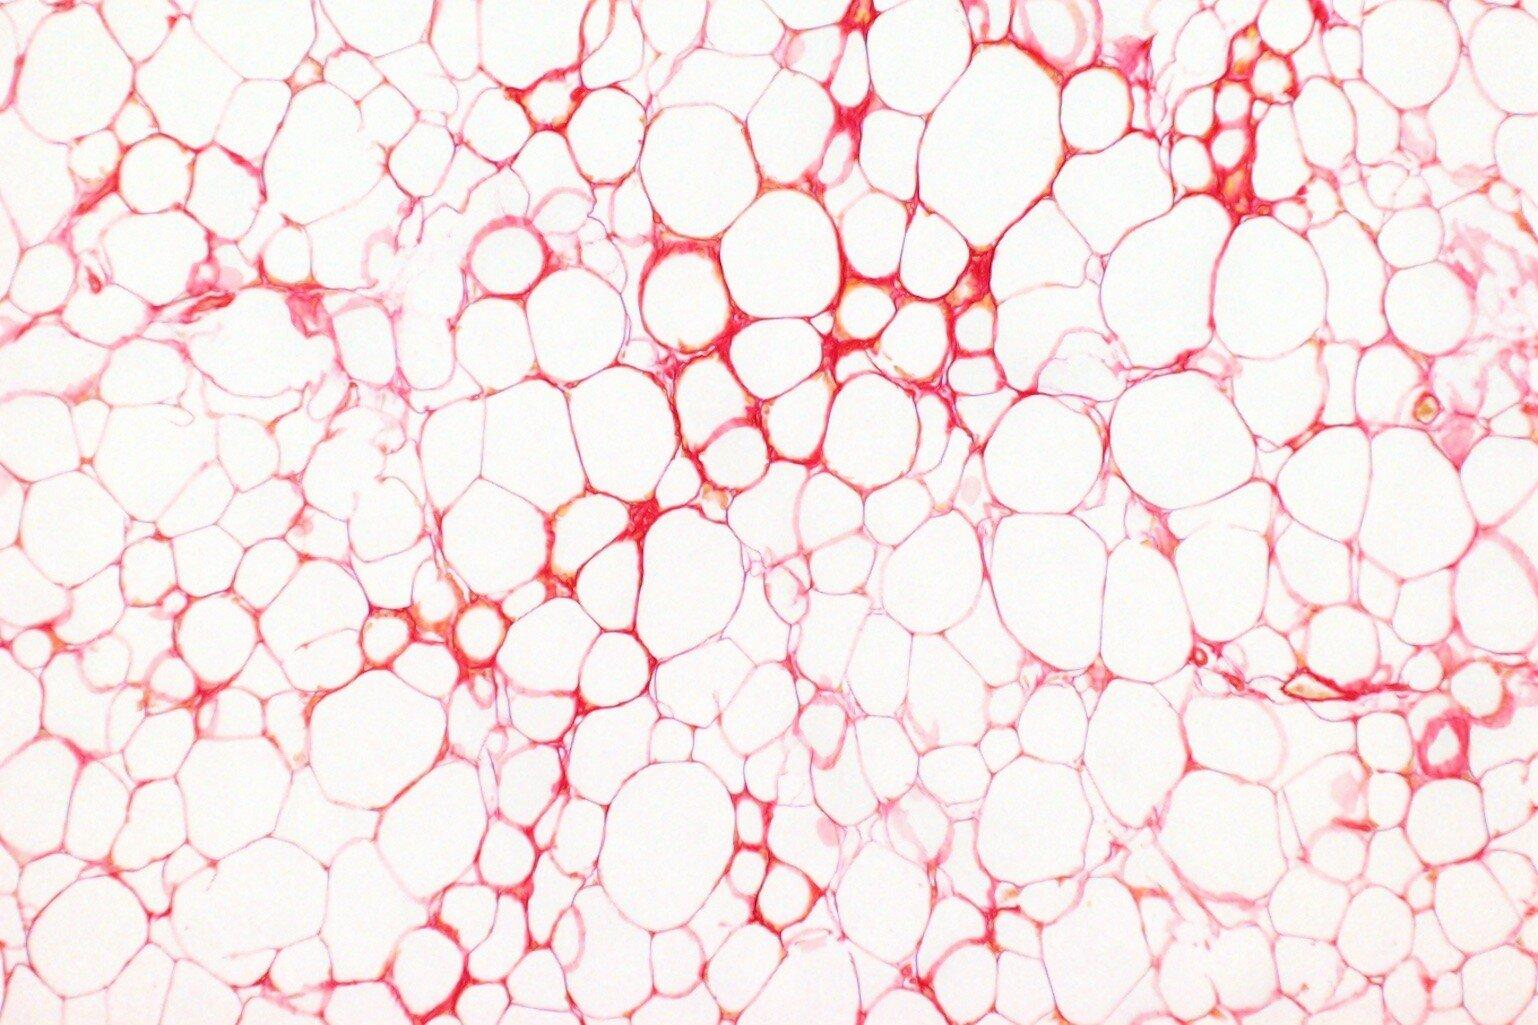 A microscopic image of adipose tissue shows hundreds of pinky red globular blobs.